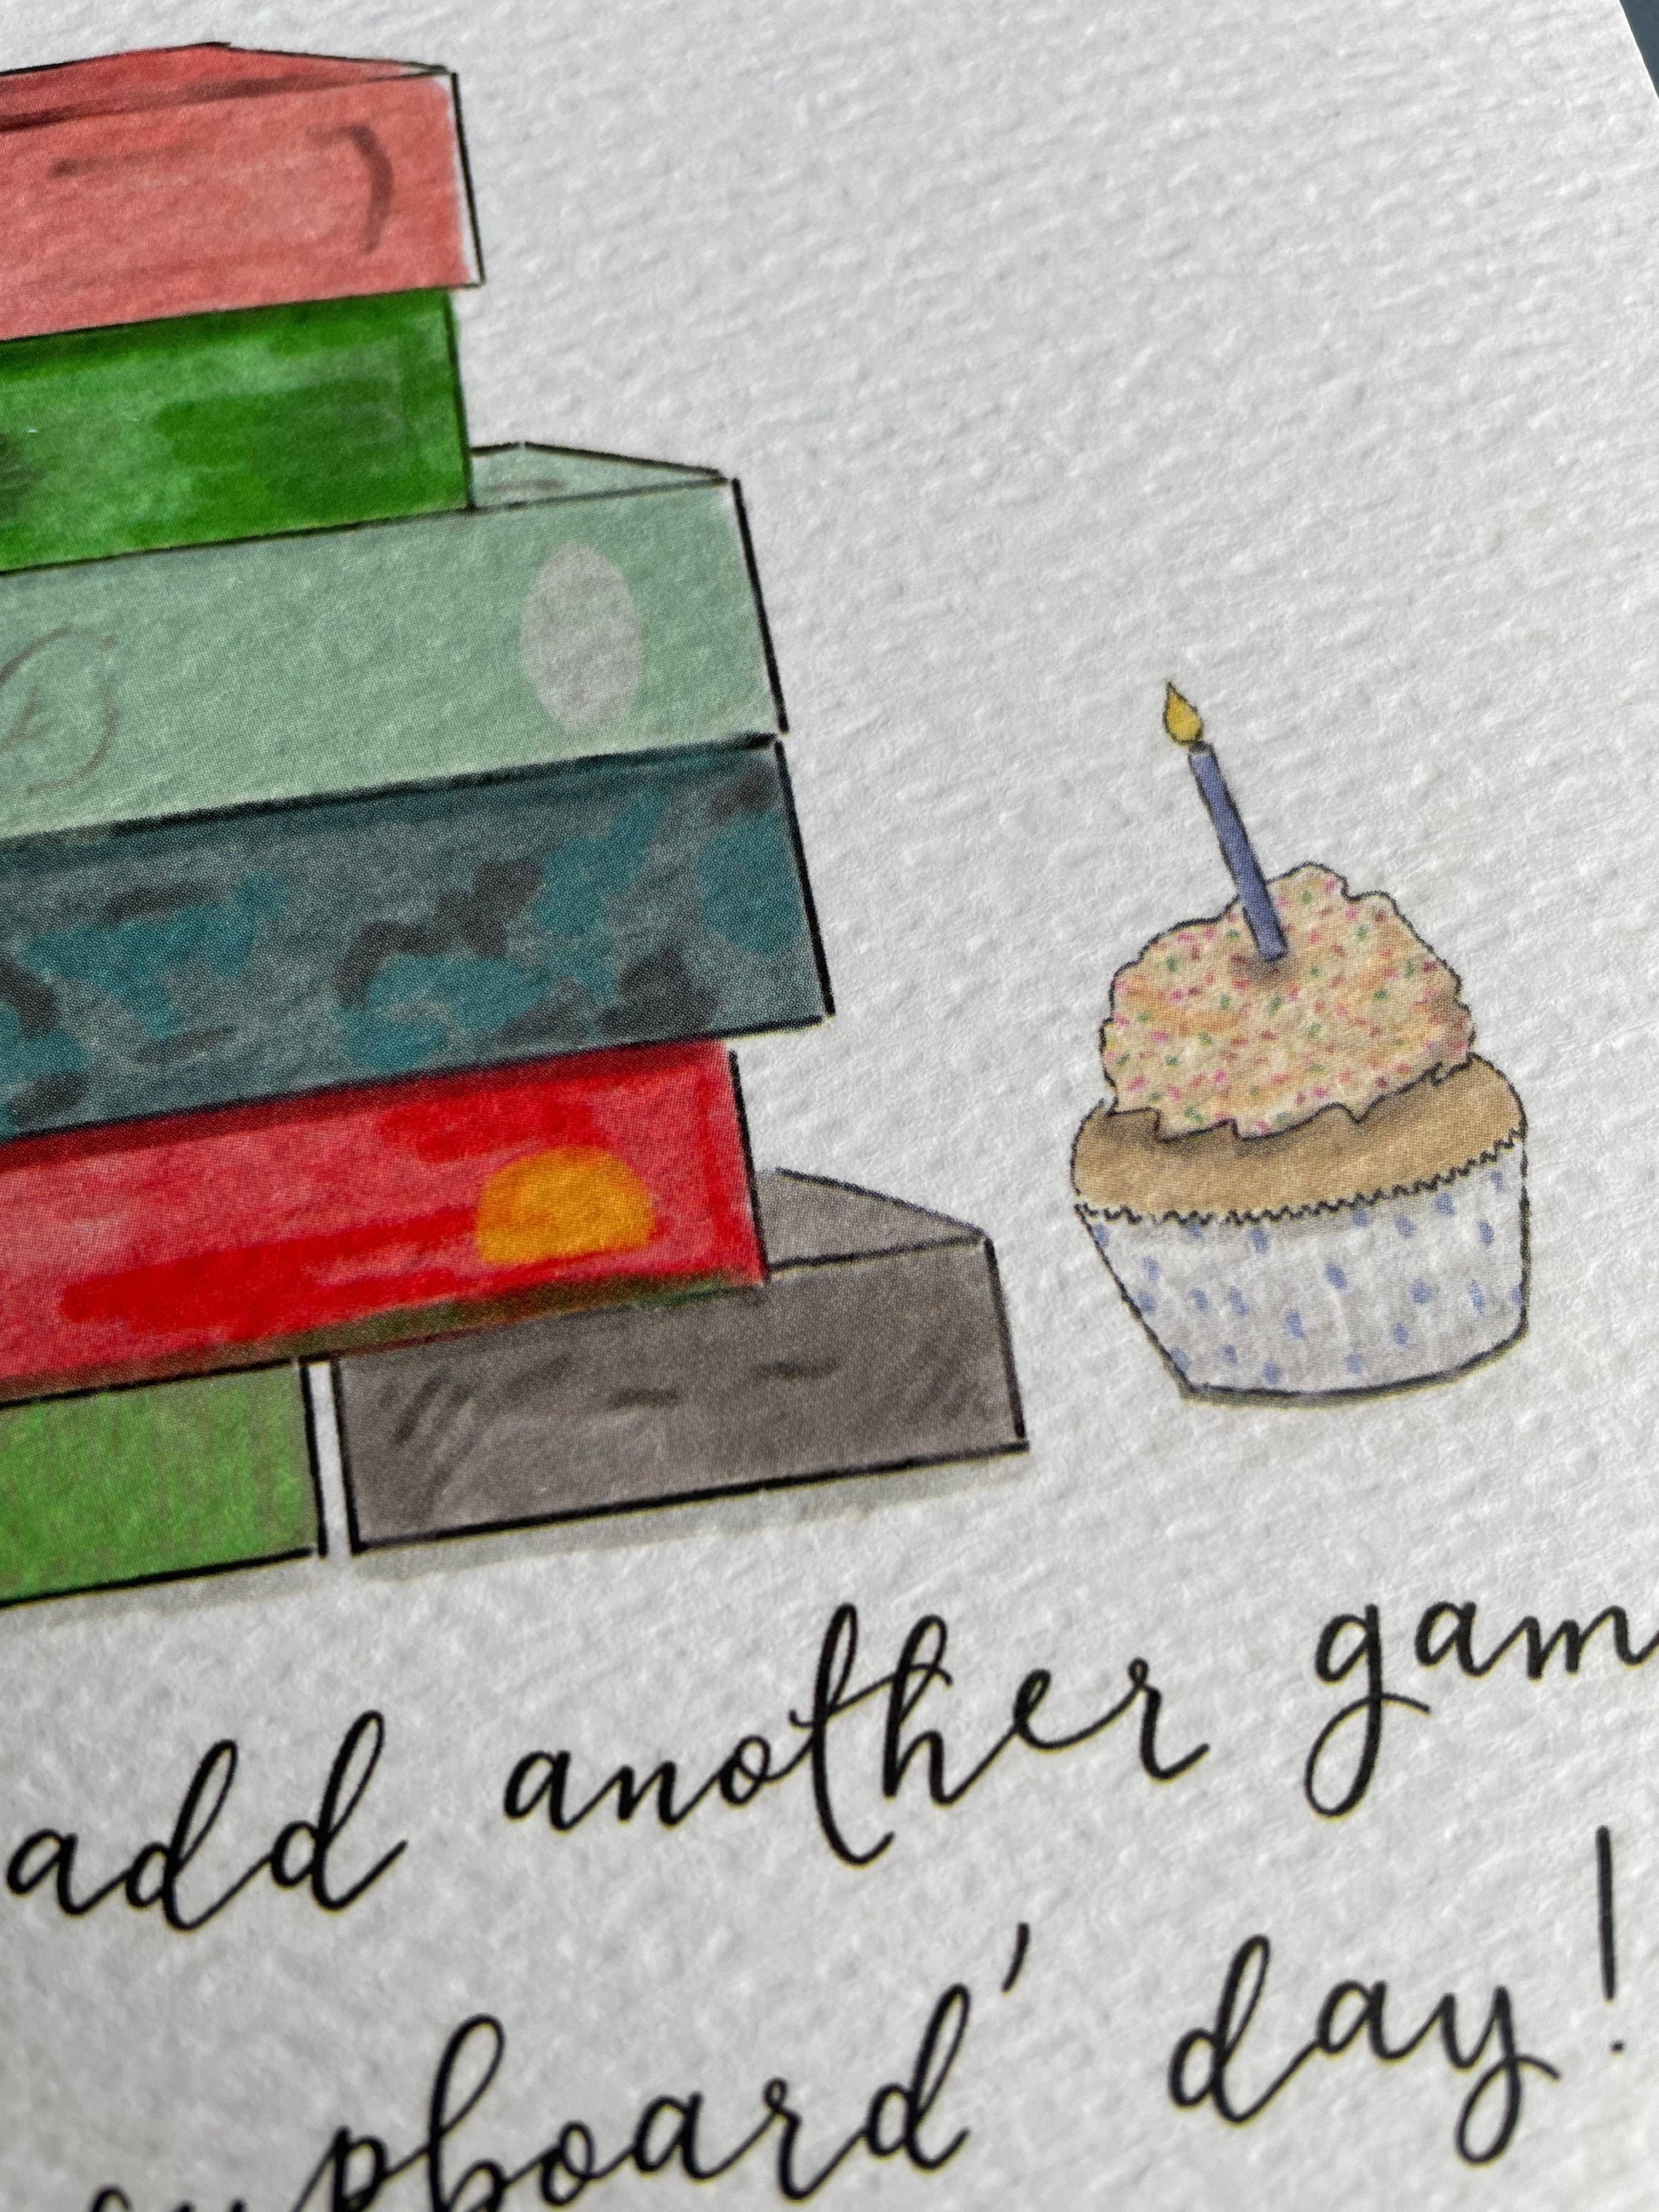 Board game birthday card Cards And Hope Designs   